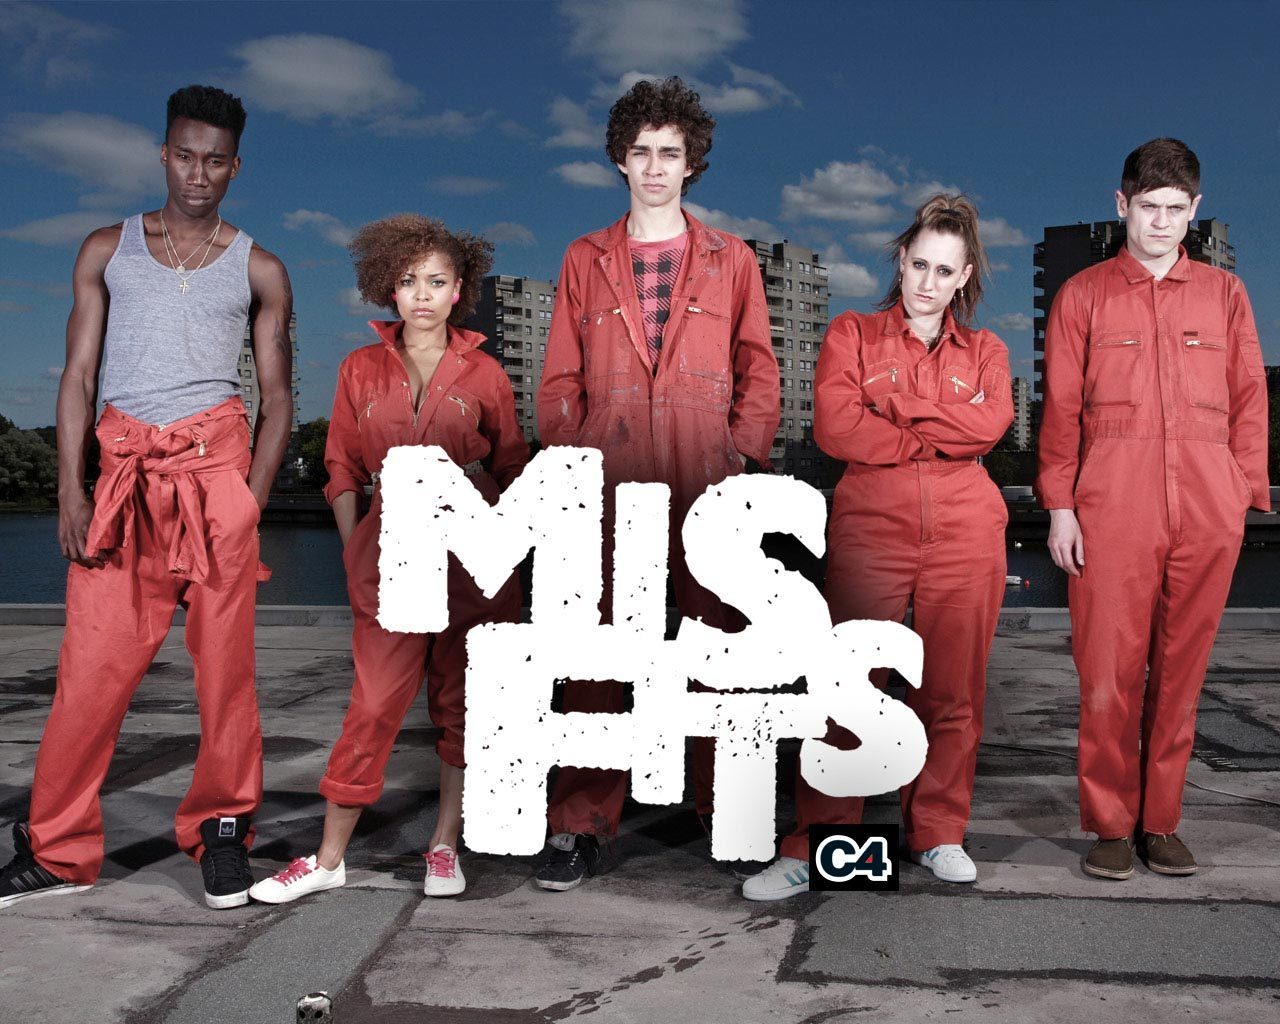 UK Girls  Lovers Of All British Things images Misfits [TV Series